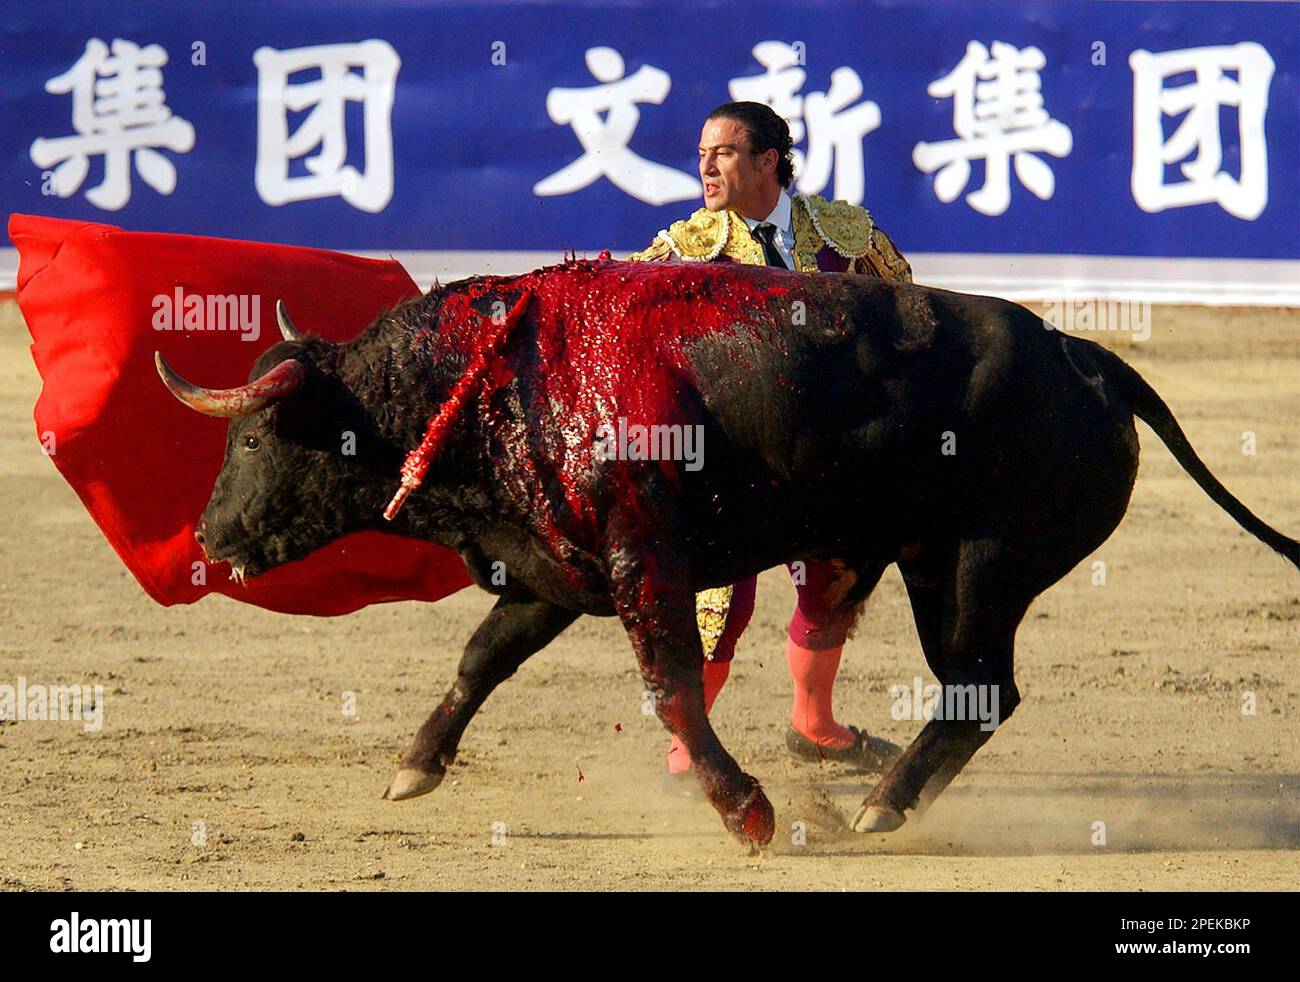 Why bullfighter capes are red